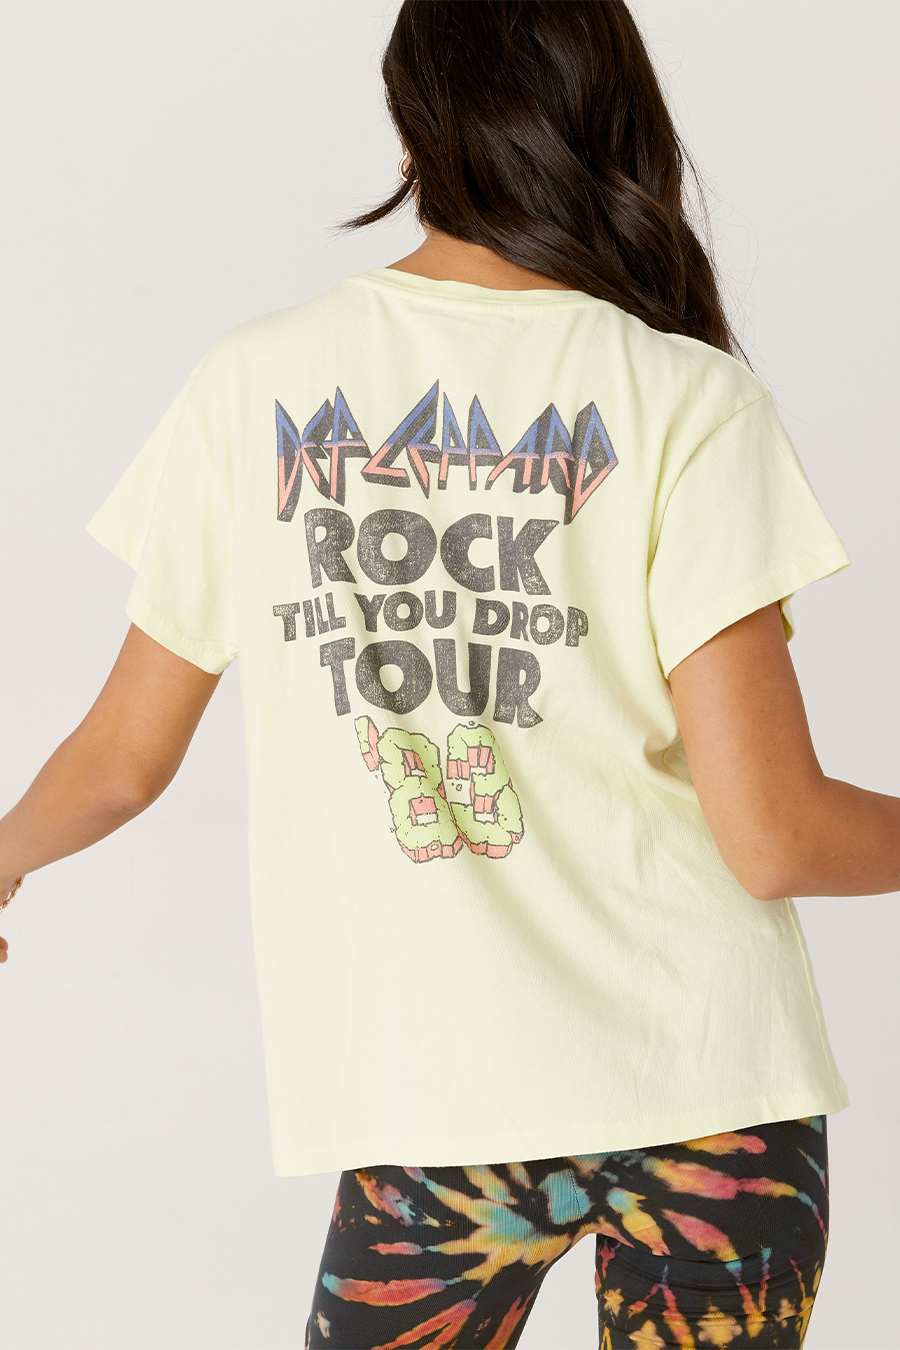 Def Leppard Rock Tour Tee | Tender Yellow - Main Image Number 2 of 2